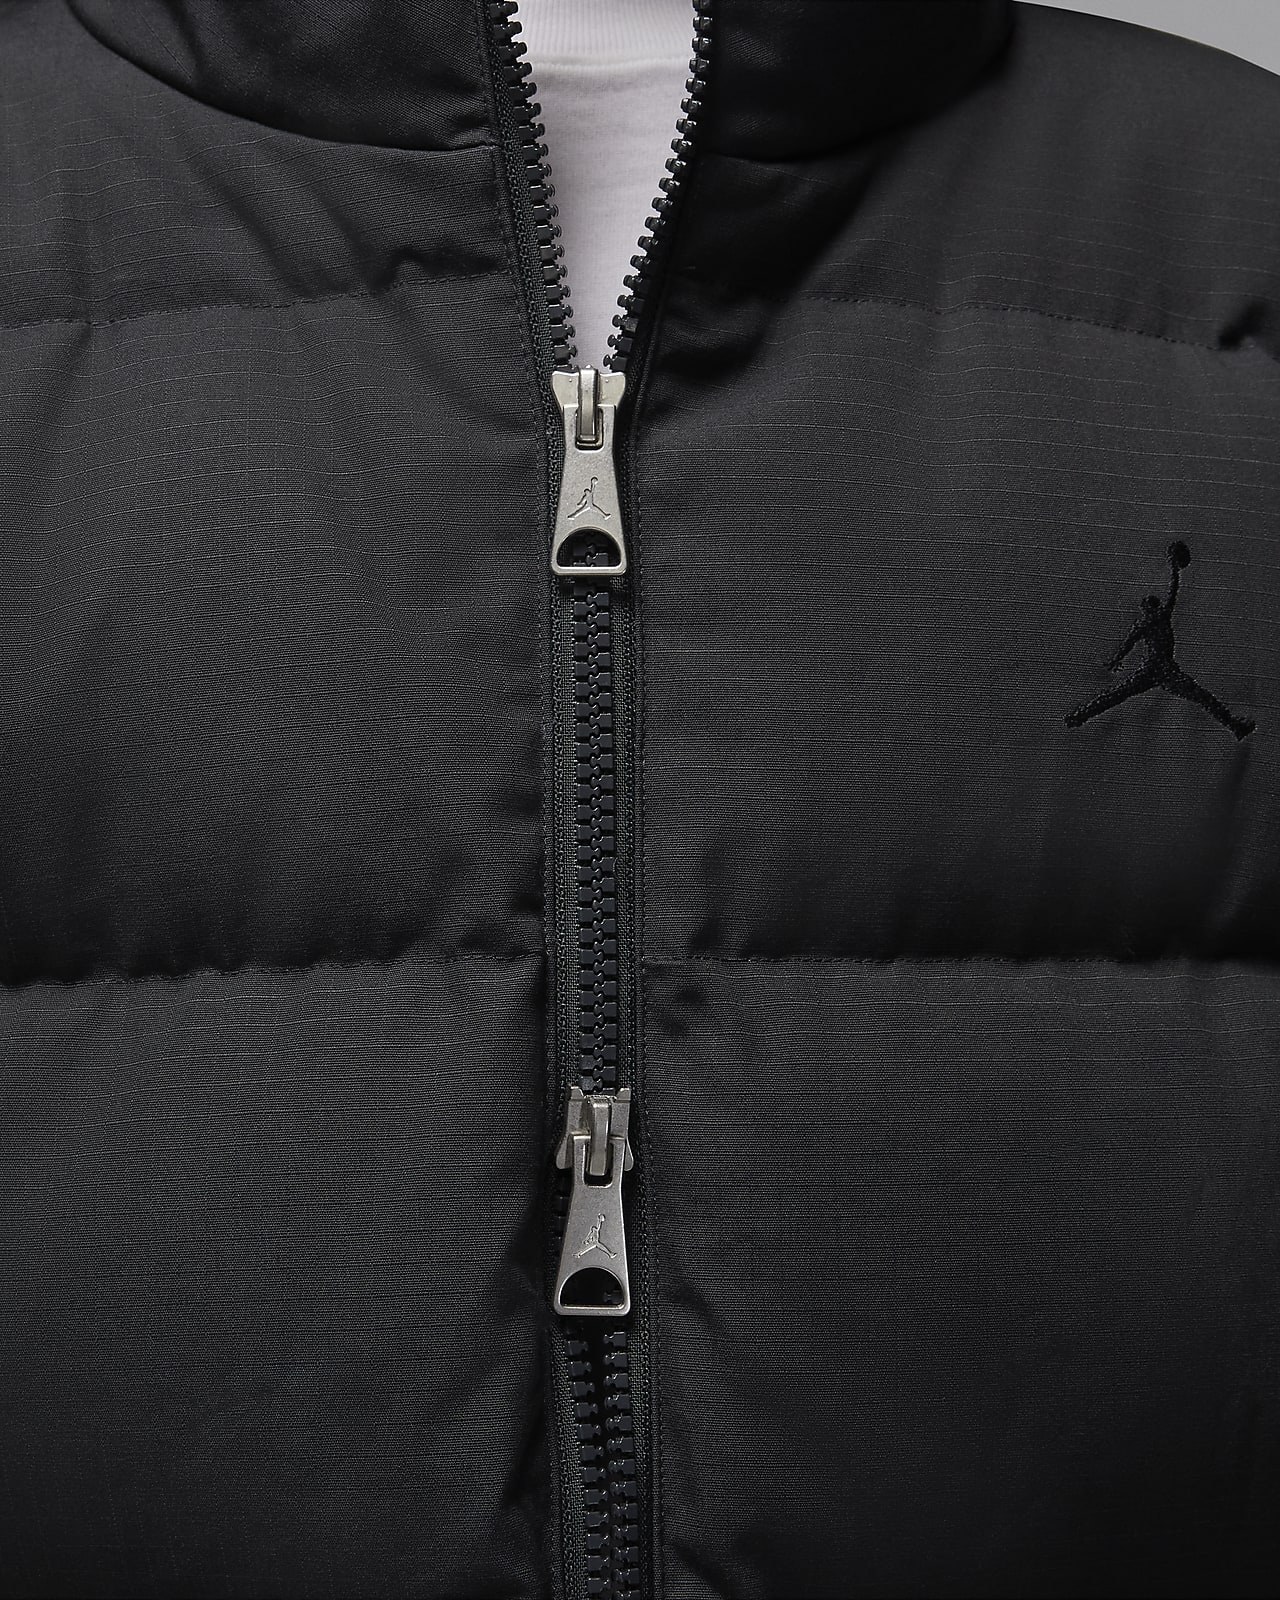 How to Wash a Down Jacket. Nike JP